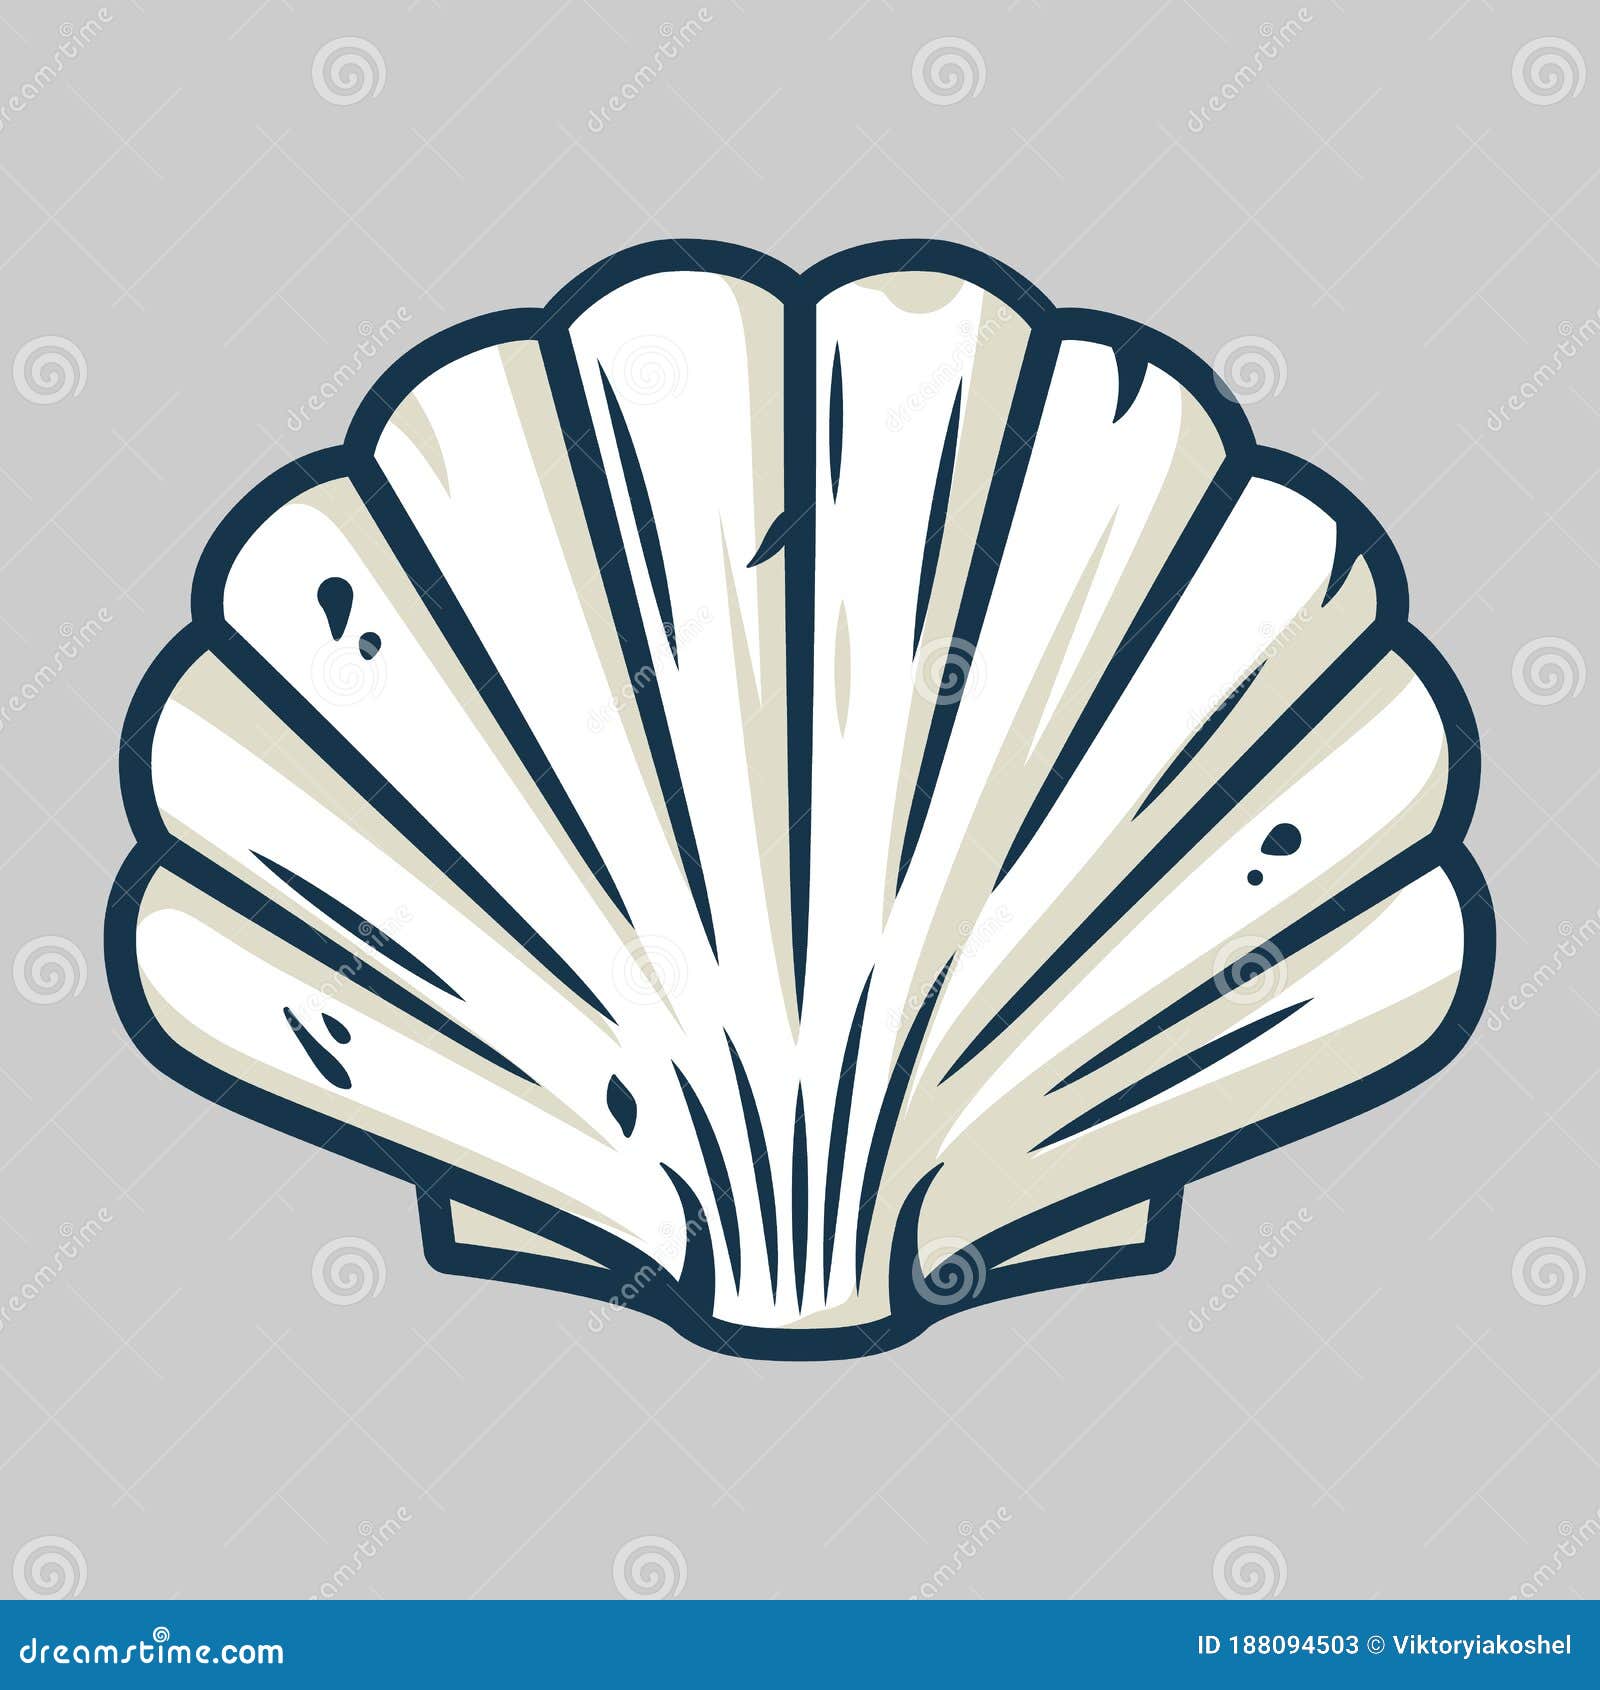 graphic emblem of scallop sea shell, clam, conch